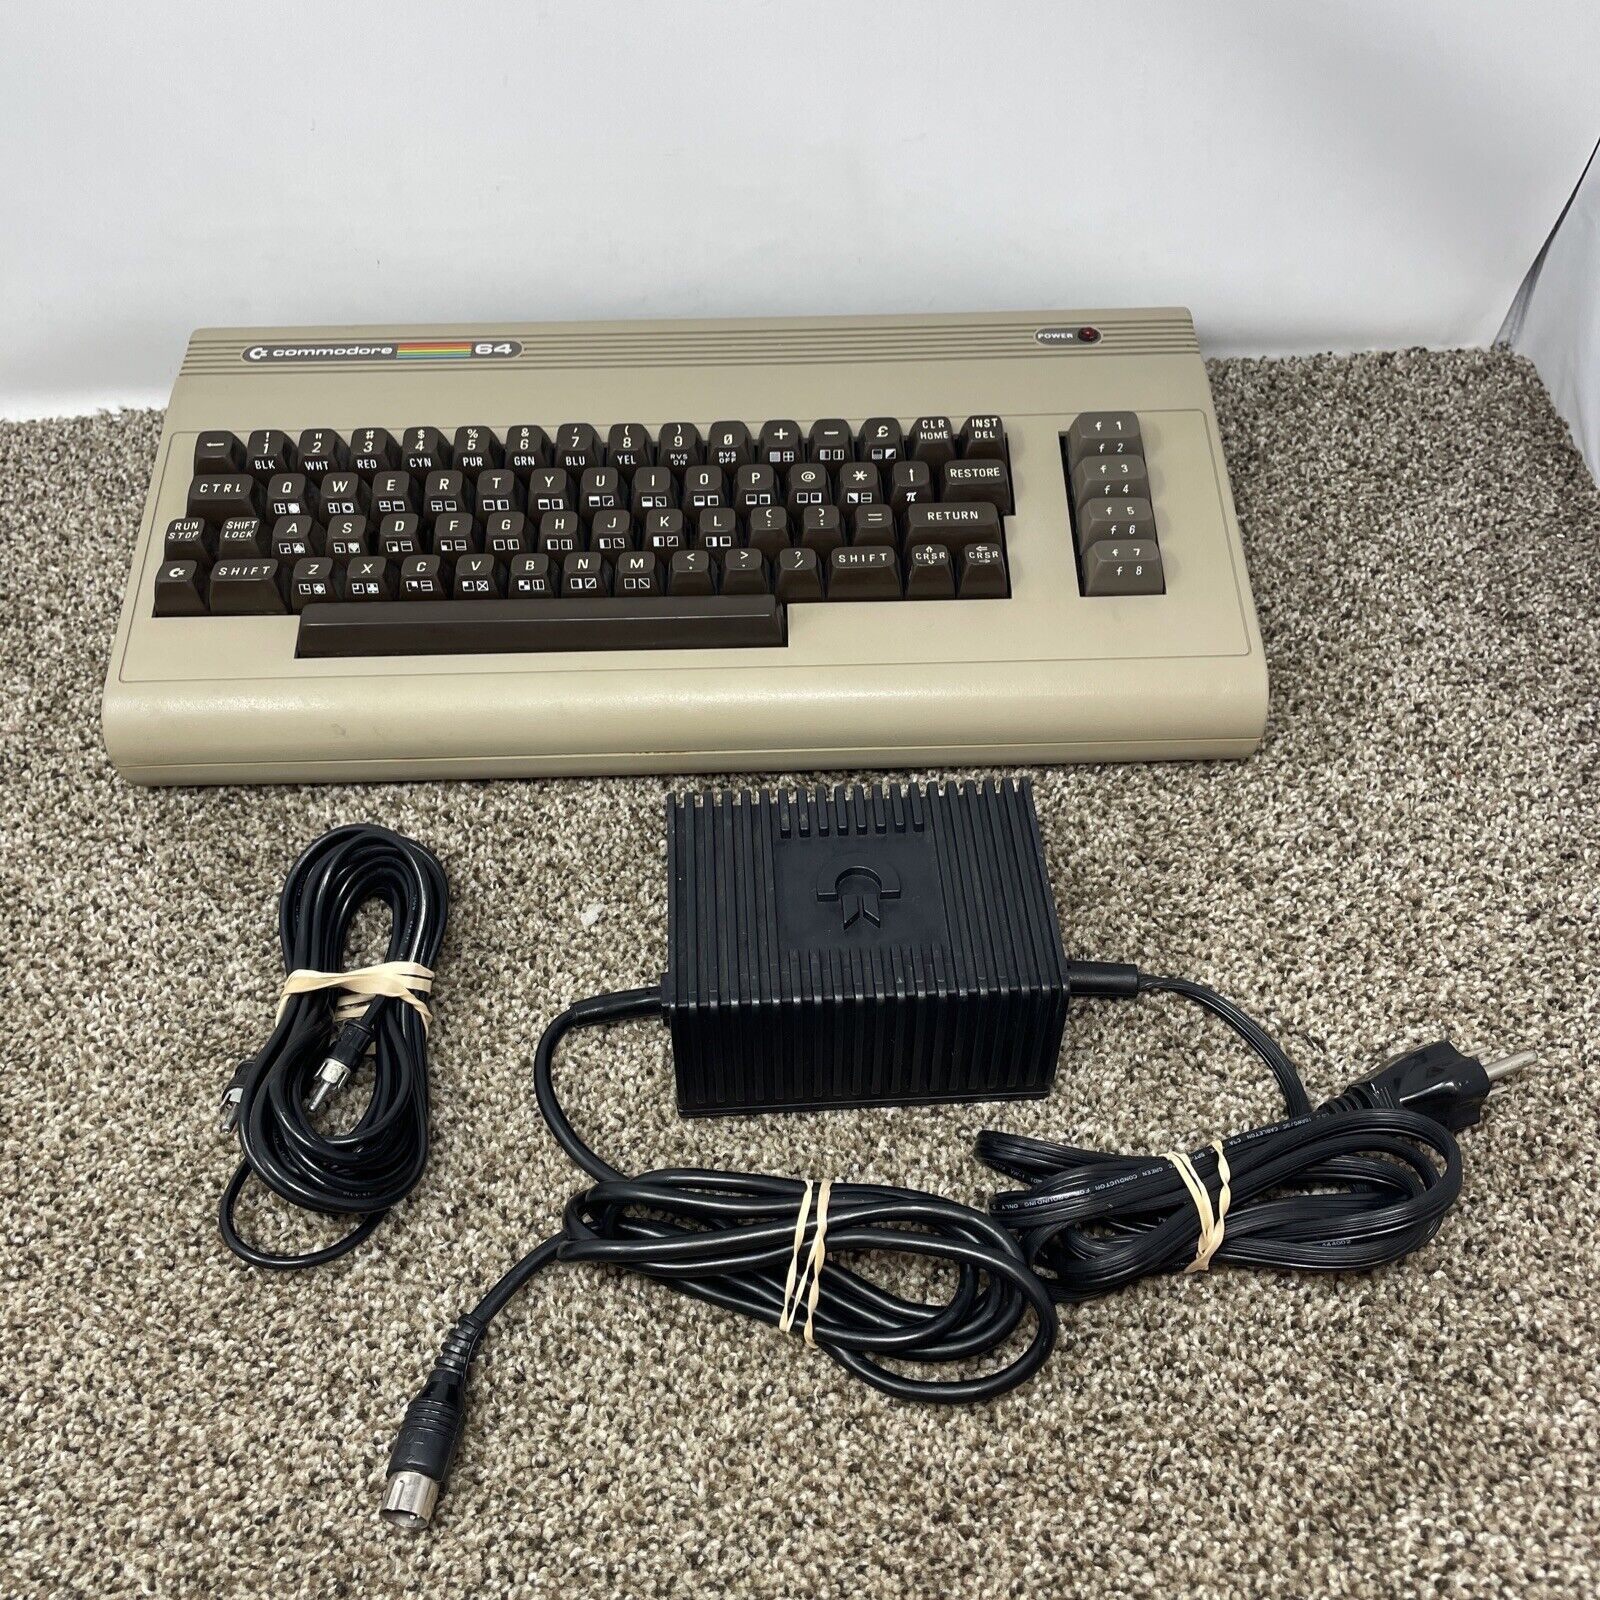 Vintage Commodore 64 Personal Computer - Tested and working Breadbin